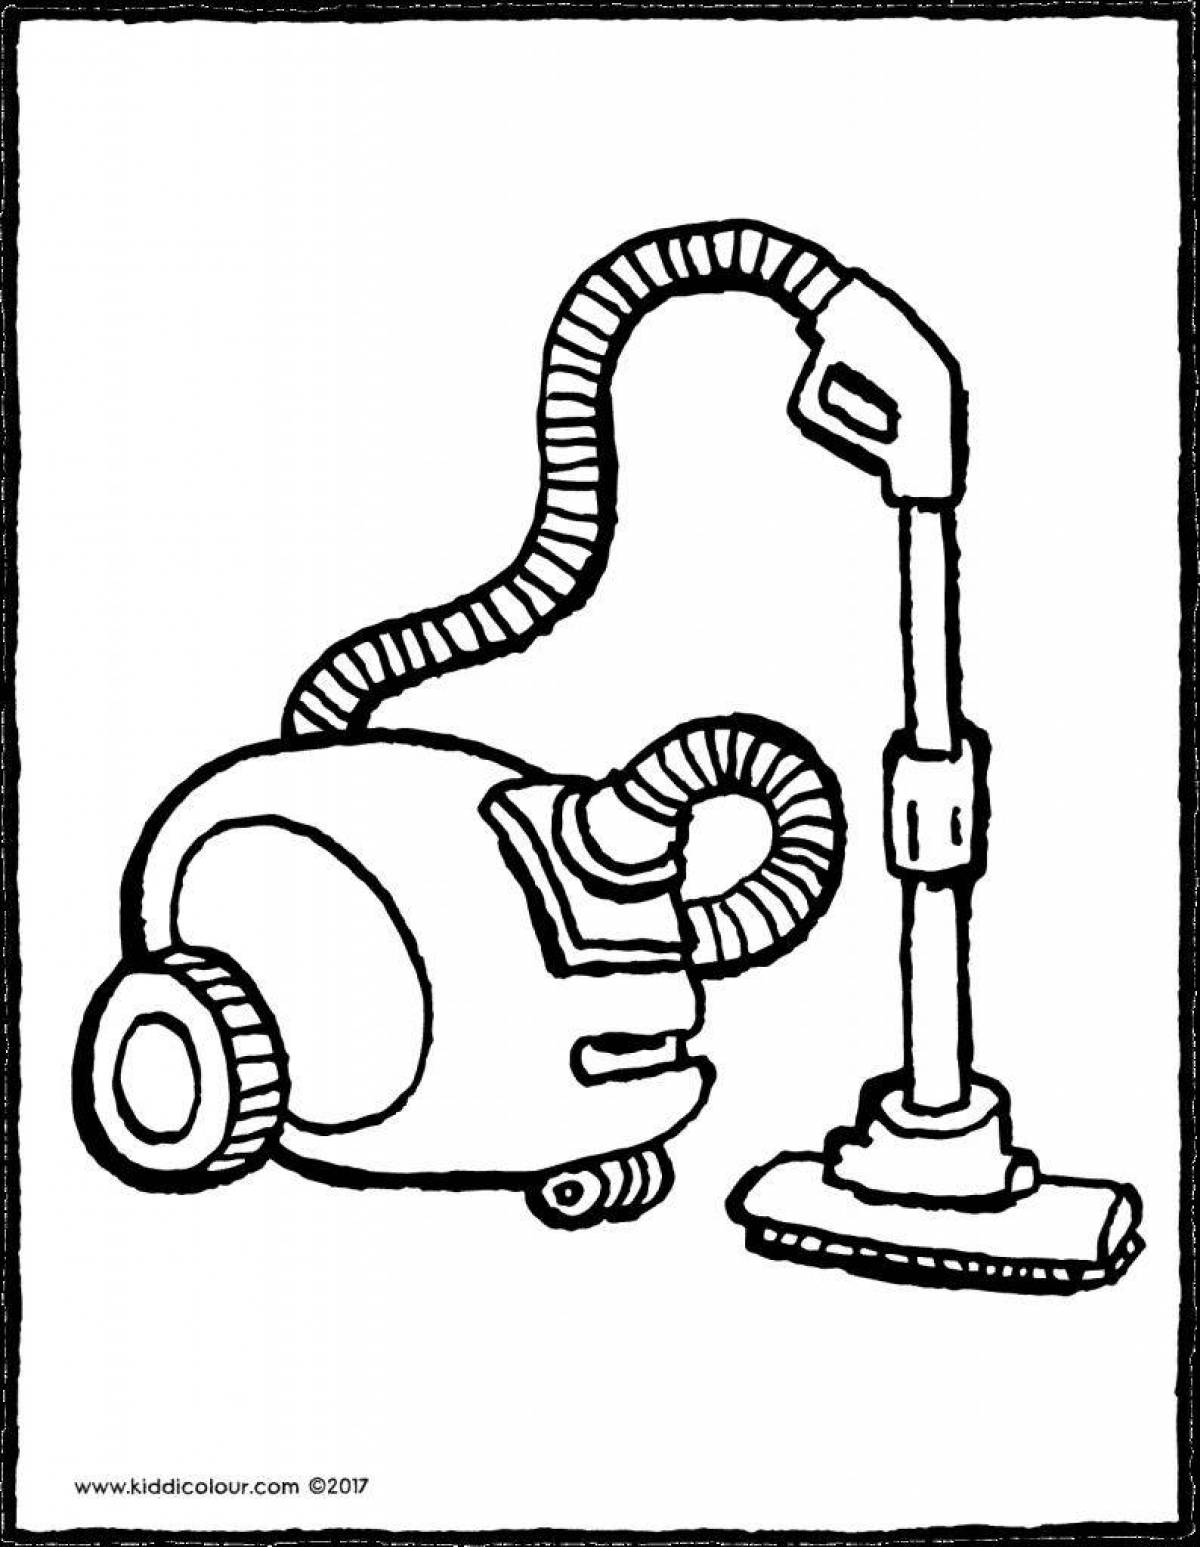 Joyful vacuum cleaner coloring book for 3-4 year olds